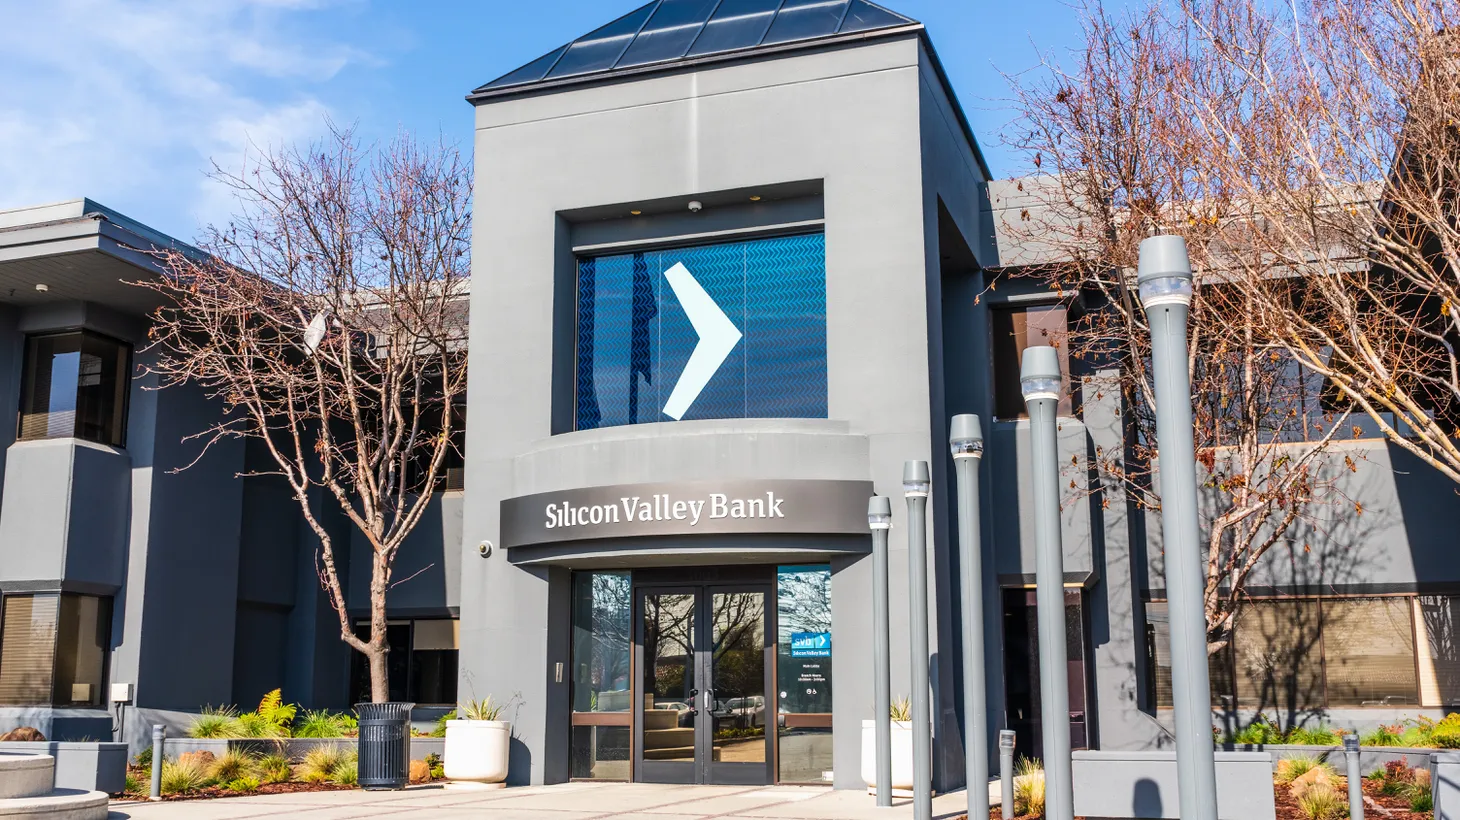 Silicon Valley Bank is the latest California financial institution to go belly up, but the Golden State has a long and dubious history of shoddy banking practices.